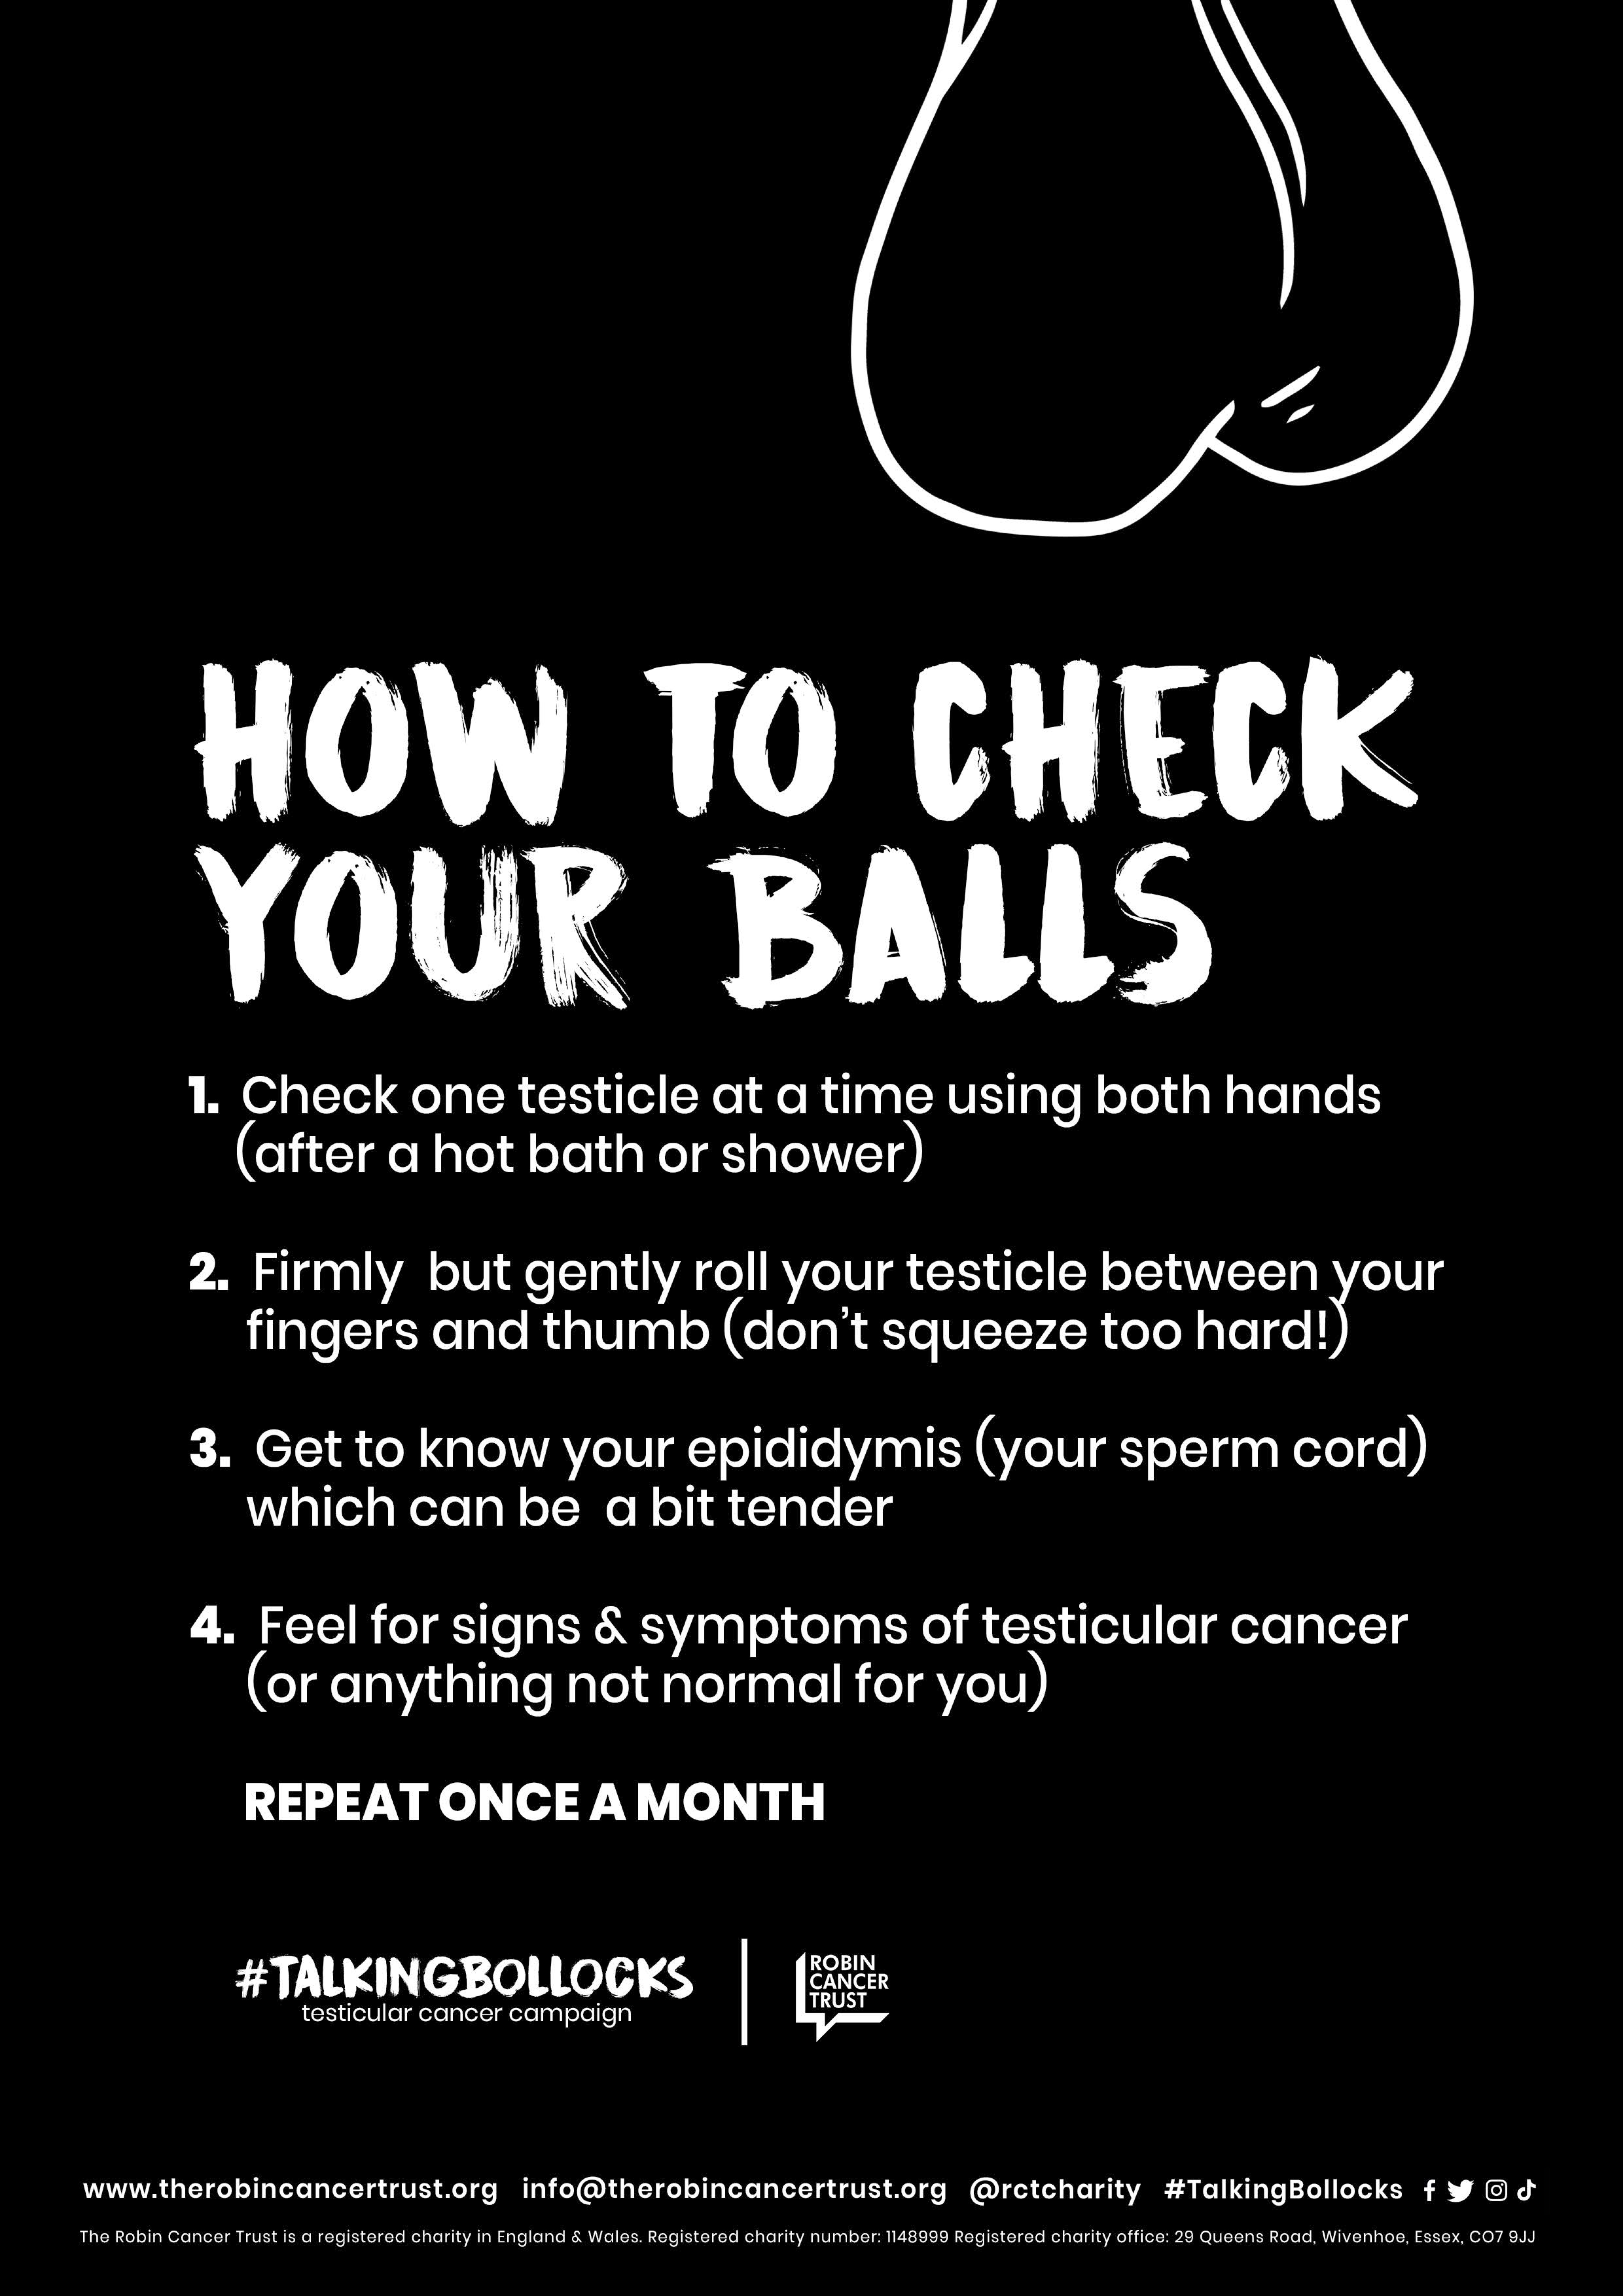 How to check your balls

1. Check one testicle at a time using both hands (After a hot shower or bath).
2. Firmly but gently roll your testicle between your fingers and thumb - don't squeeze too hard.
3. Get to know your epididymis (Sperm cord) which can be a bit tender.
4. Feel for signs & symptoms of testicular cancer - anything not normal for you.

REPEAT ONCE A MONTH